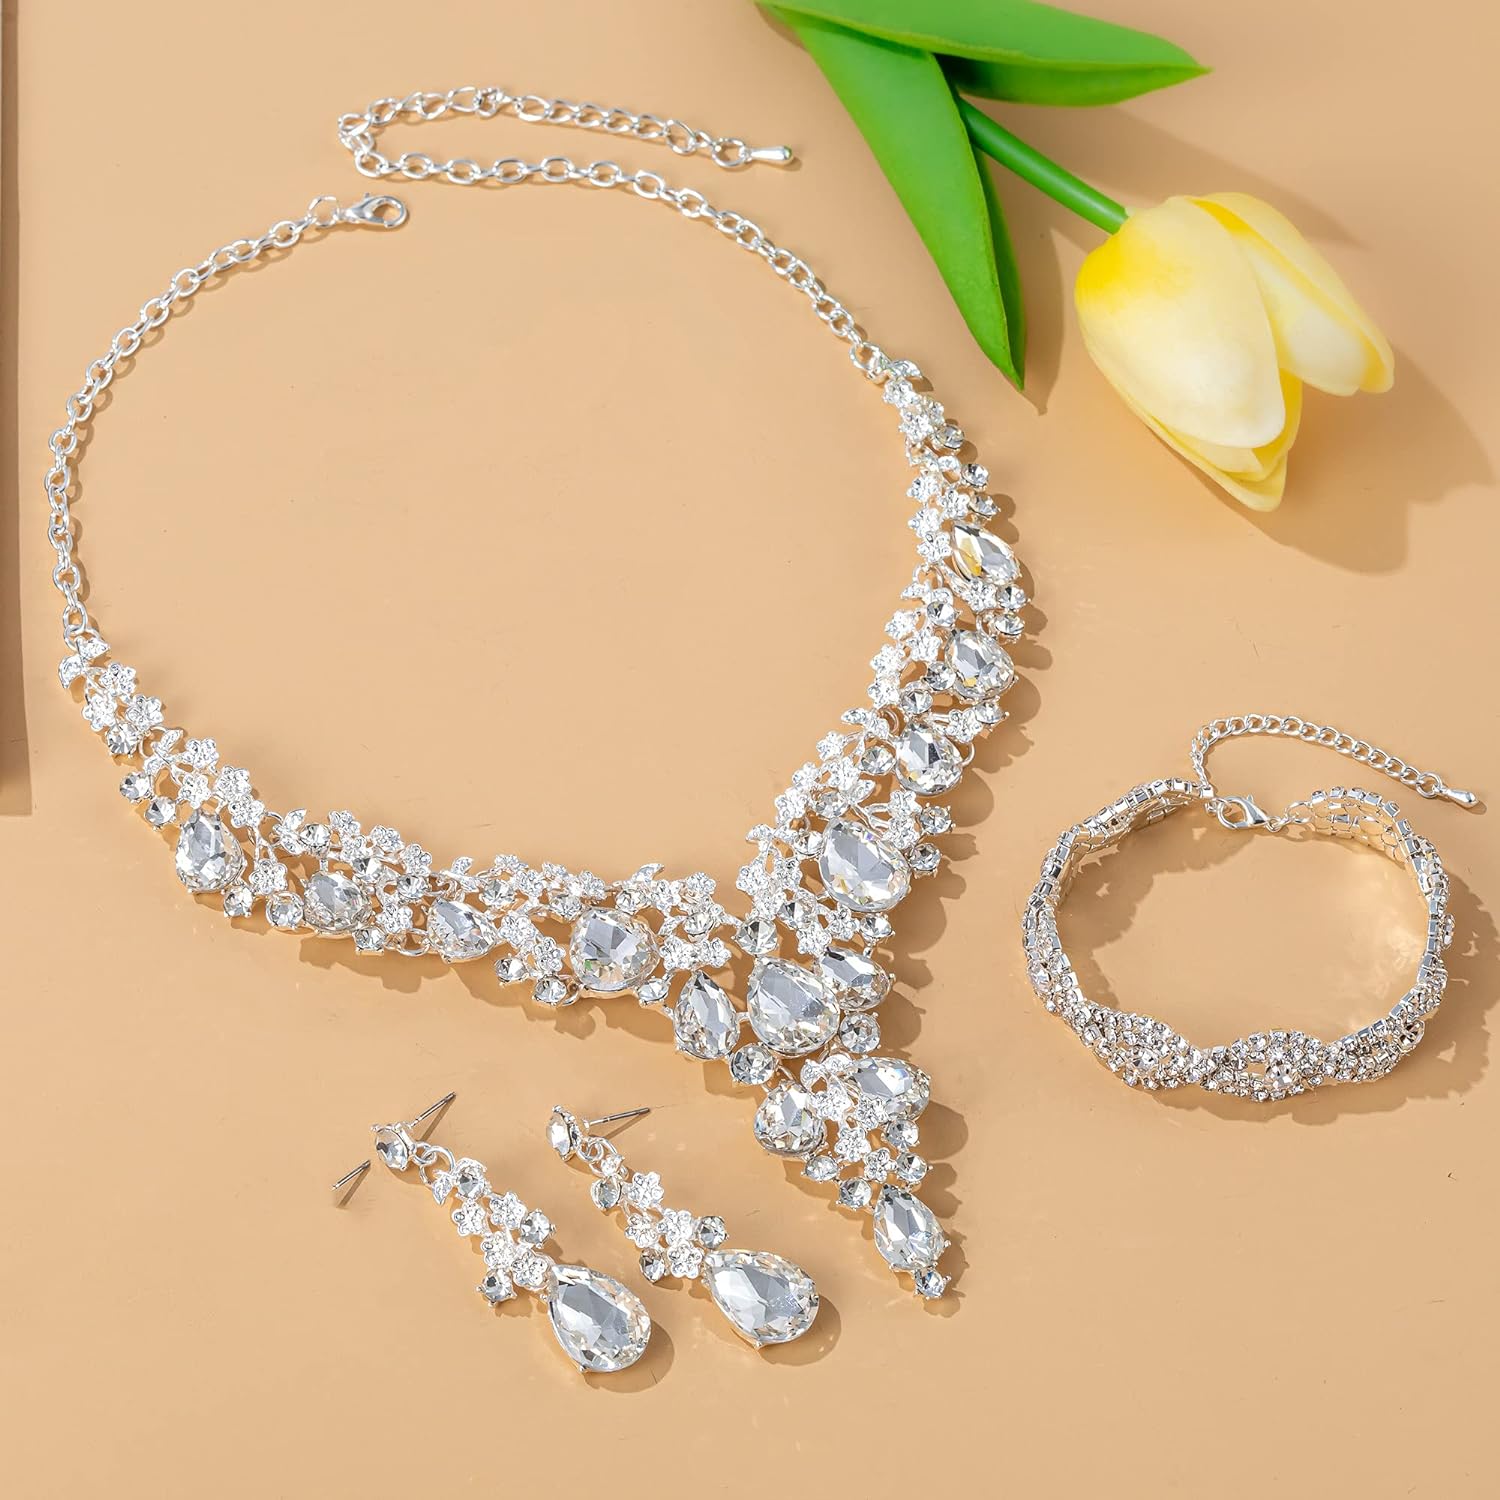 Paxuan Silver/Gold Plated Women Wedding Bridal Jewelry Set Prom Crystal Rhinestone Statement Choker Necklace Teardrop Earrings Link Bracelet Jewelry Sets for bride bridesmaid Wedding